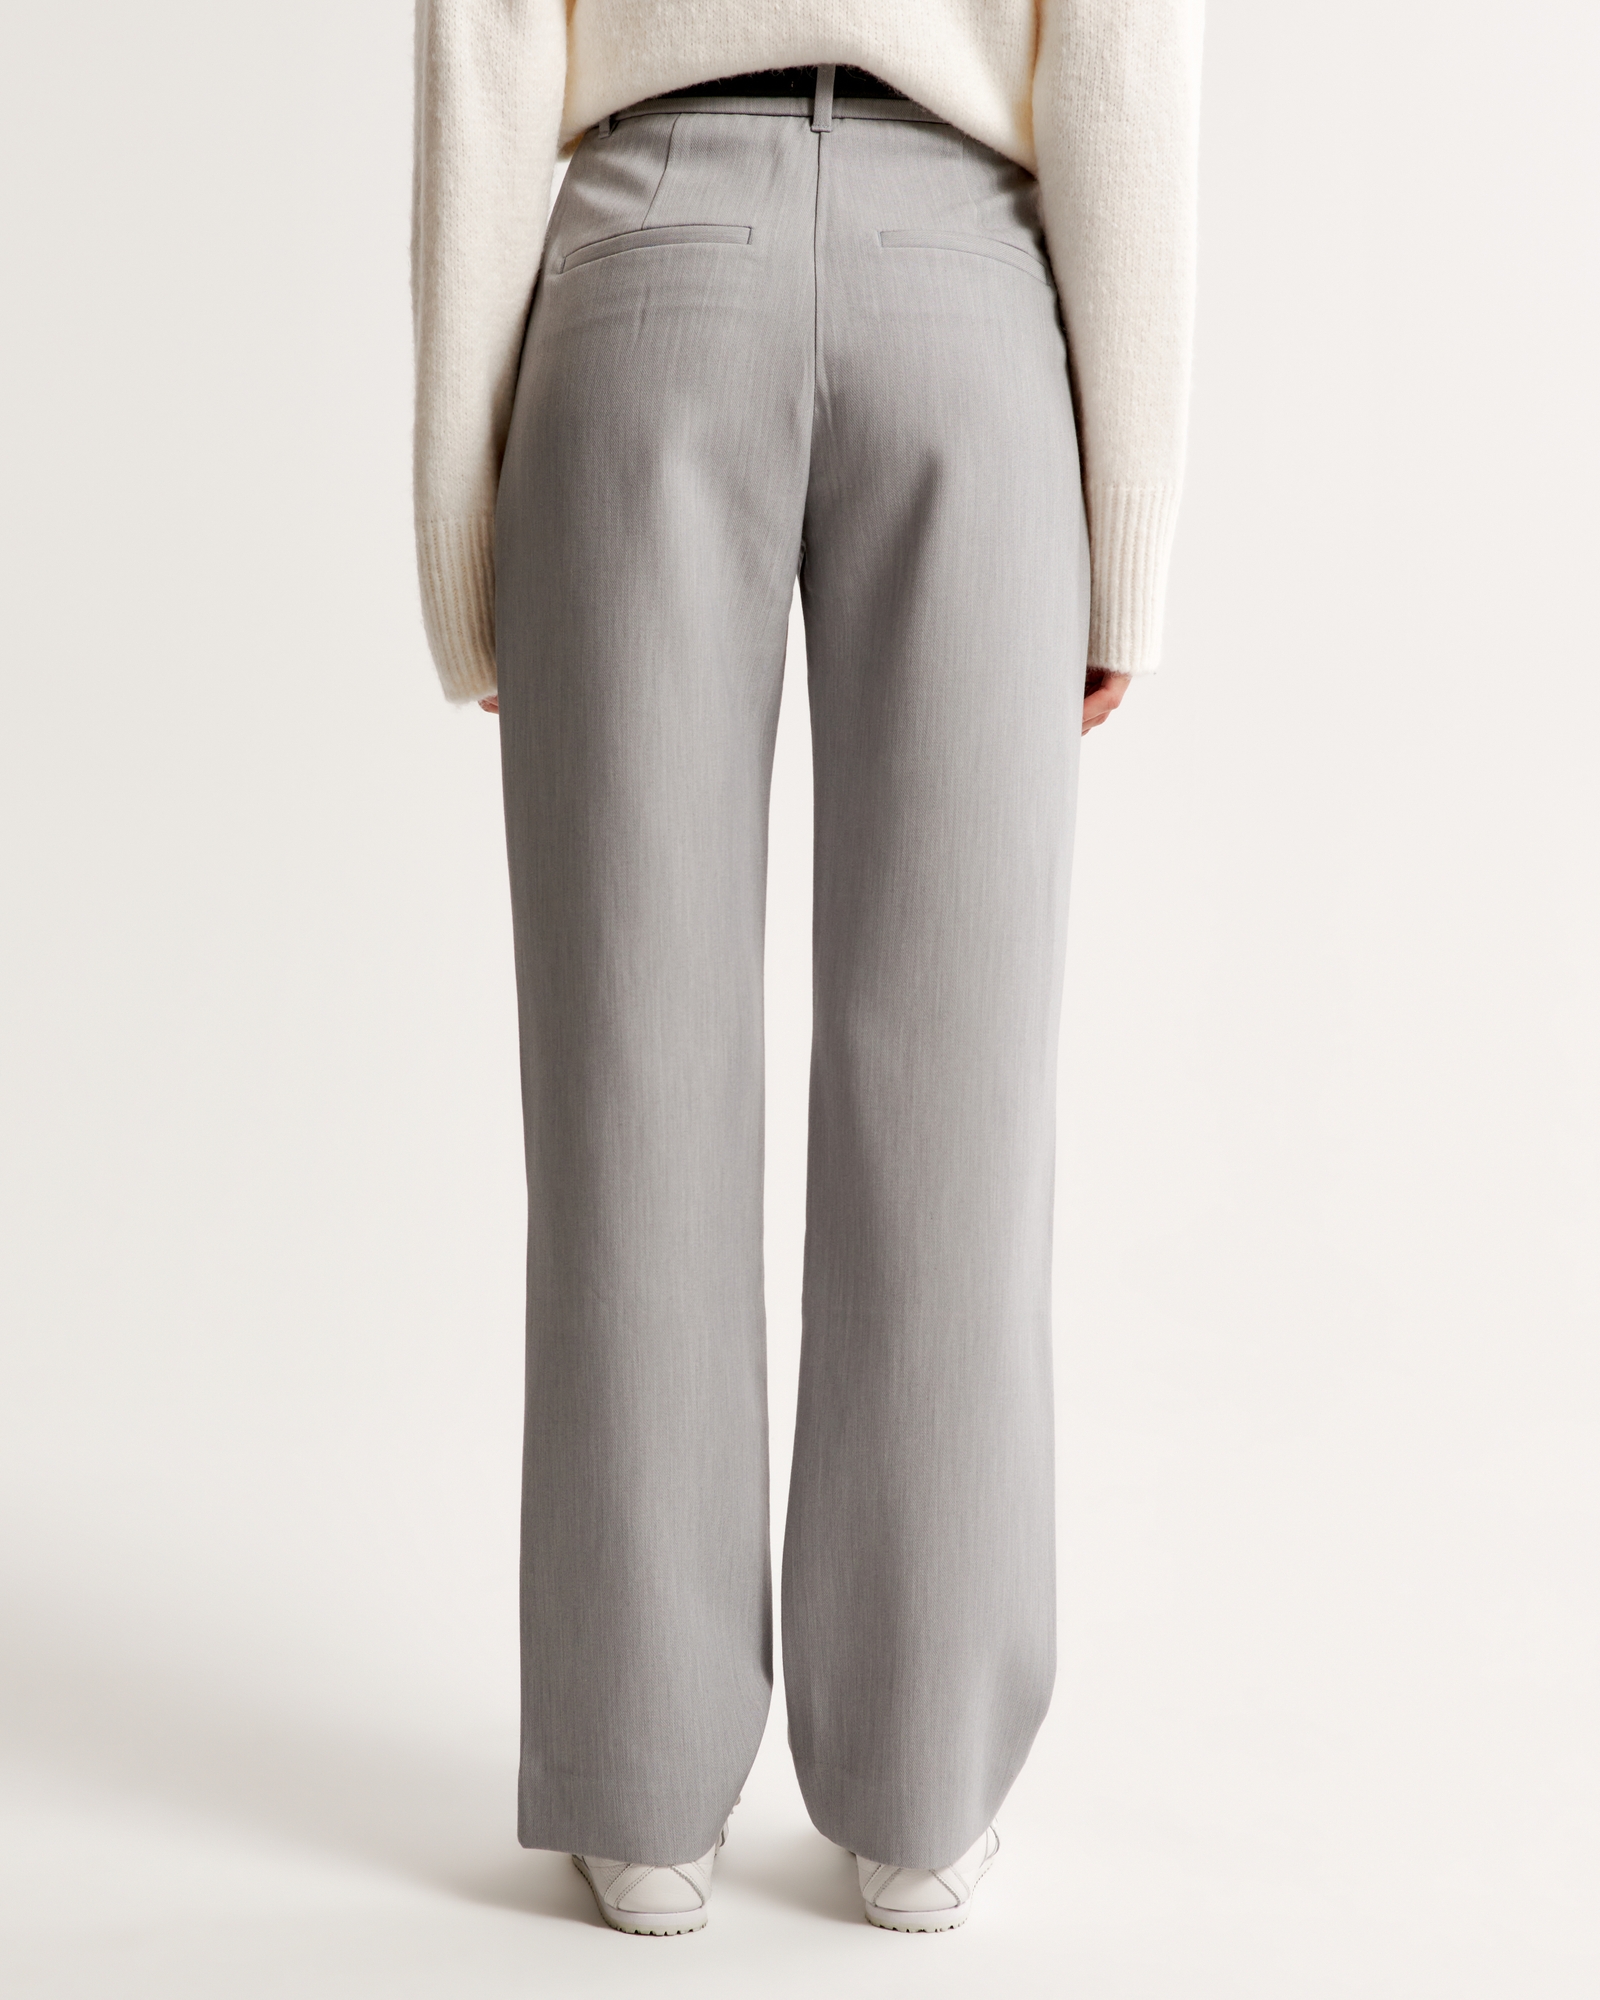 Prisma Casual Pant-Grey: Chic and Comfortable Clothing for Women